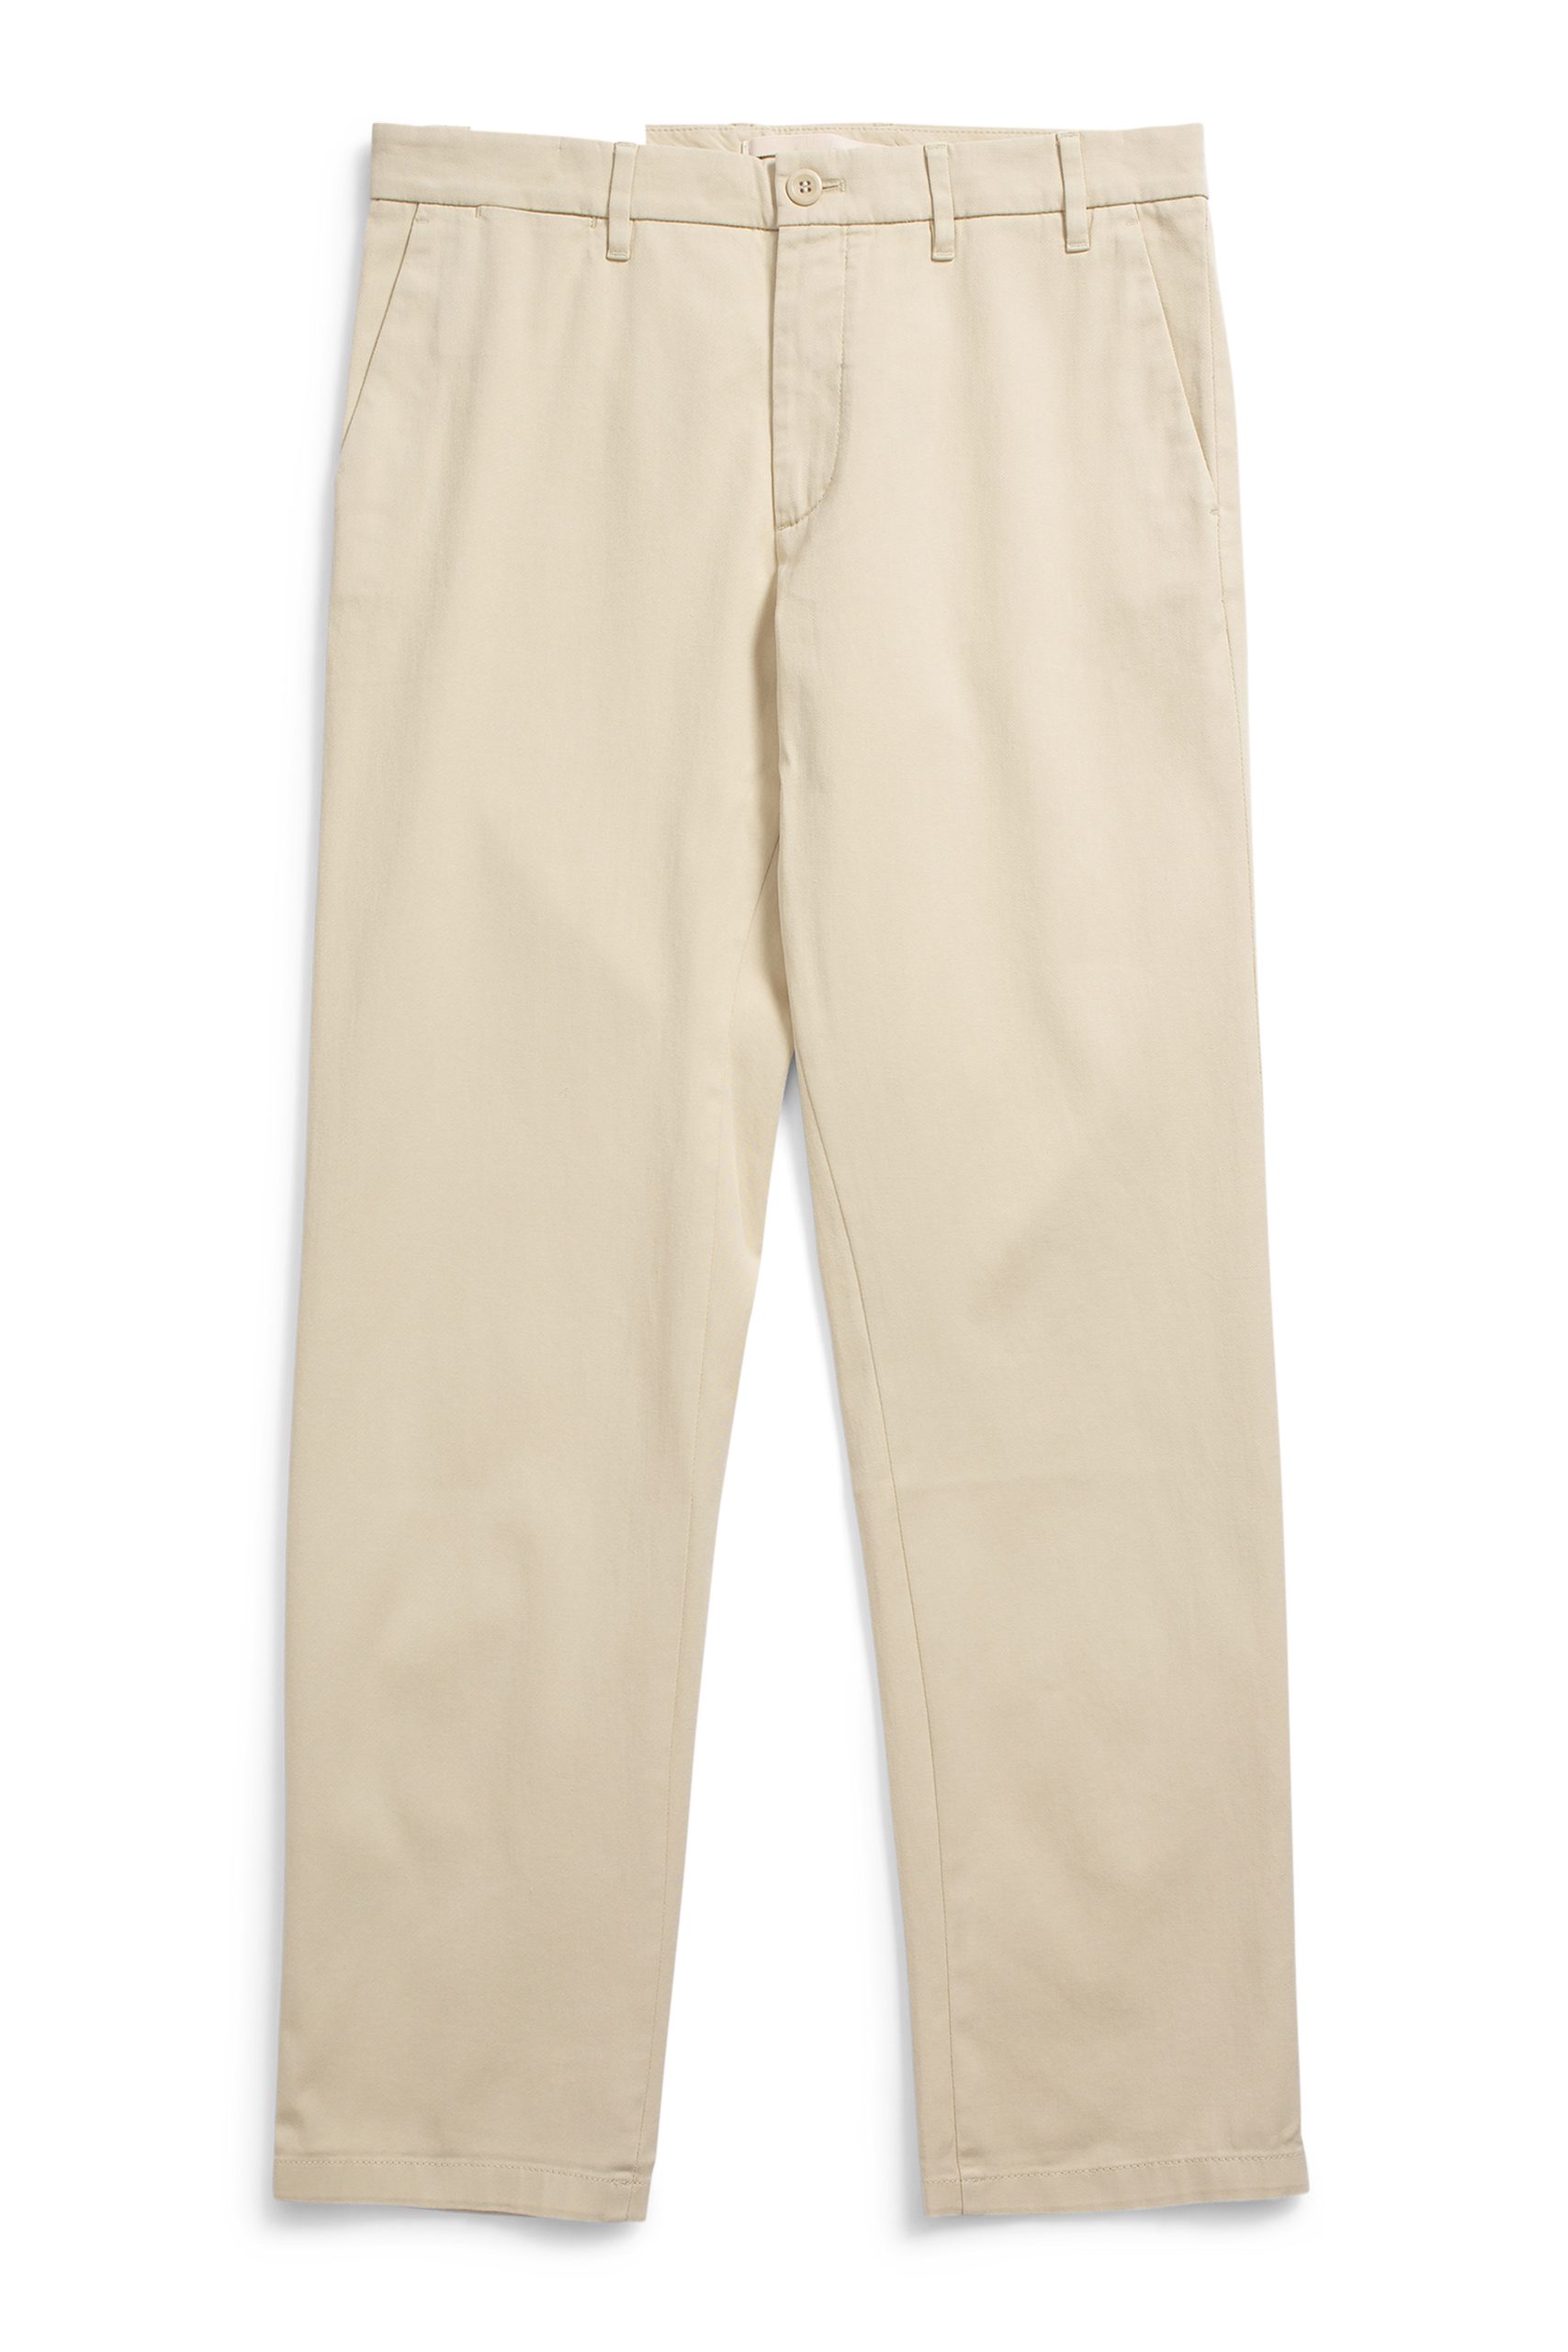 NORSE PROJECTS AROS regular stretch chino Oatmeal